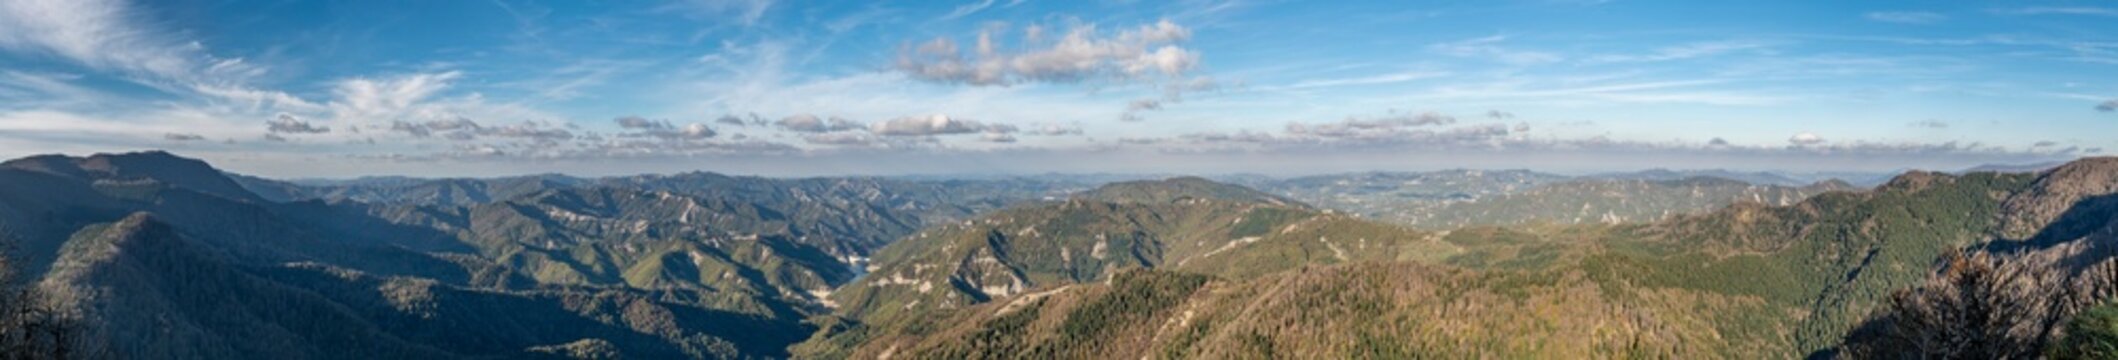 Panoramic view from the top of Monte Penna, on the surrounding mountains, between Tuscany and Emilia Romagna, Italy, between Badia Prataglia and the hermitage of Camaldoli